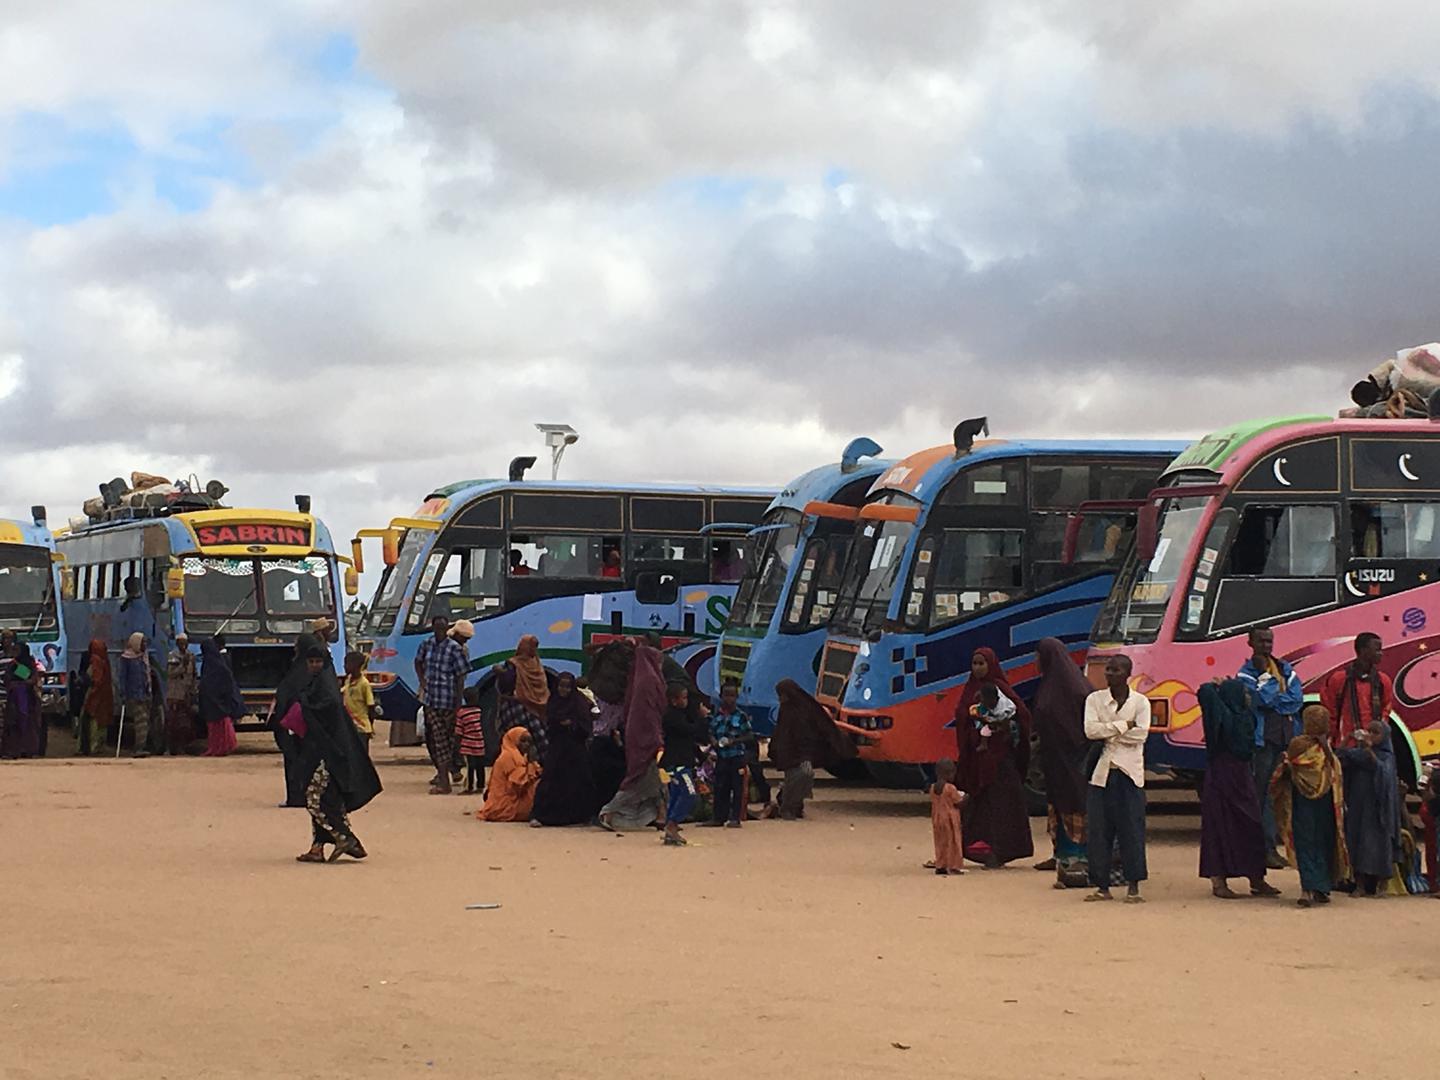 Photo of Somali refugees getting on buses to leave Dadaab refugee camp.